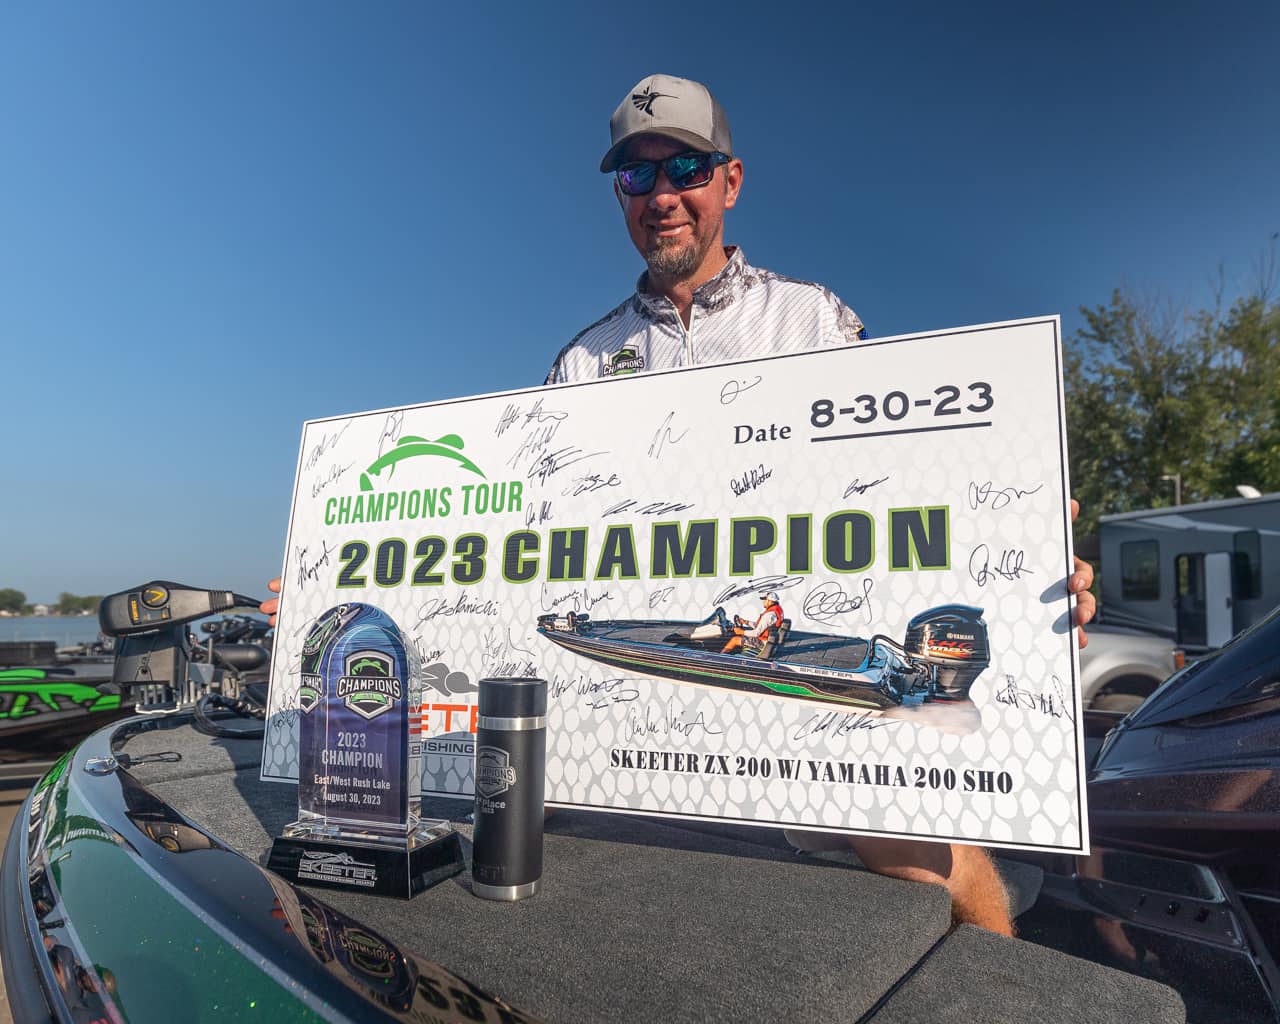 TrophyCatch Boat Giveaway Comes Full Circle for Winner - Coastal Angler &  The Angler Magazine